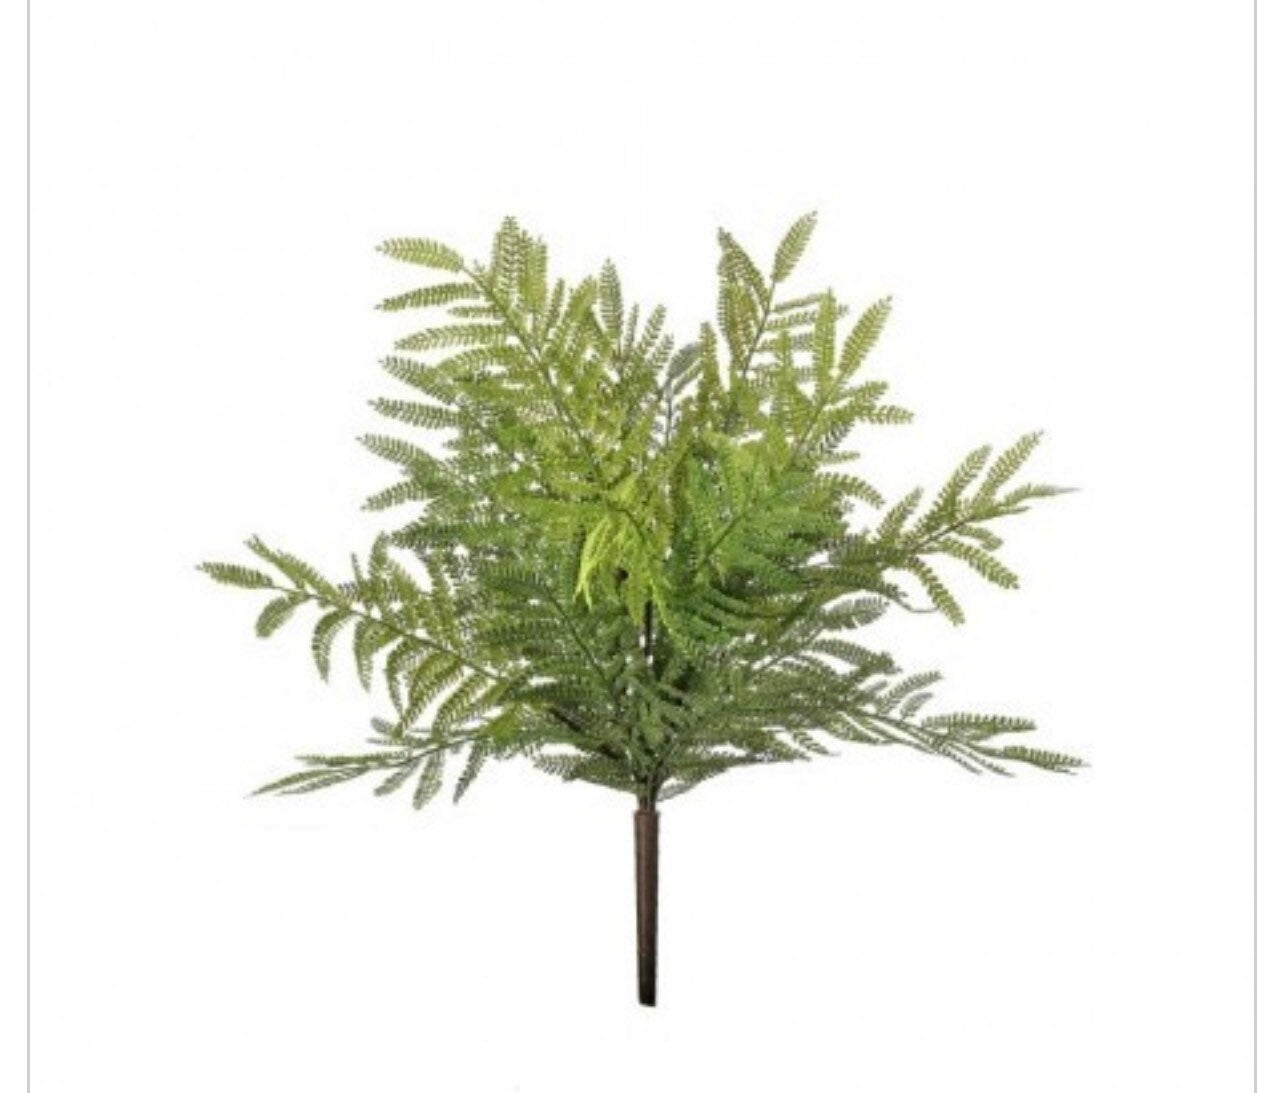 Regency UV Natural Touch Ostrich Fern Bush, Greenery, Floral Supplies, Wreath Greenery, Floral Greenery, Picks, Tiered Tray Greenery